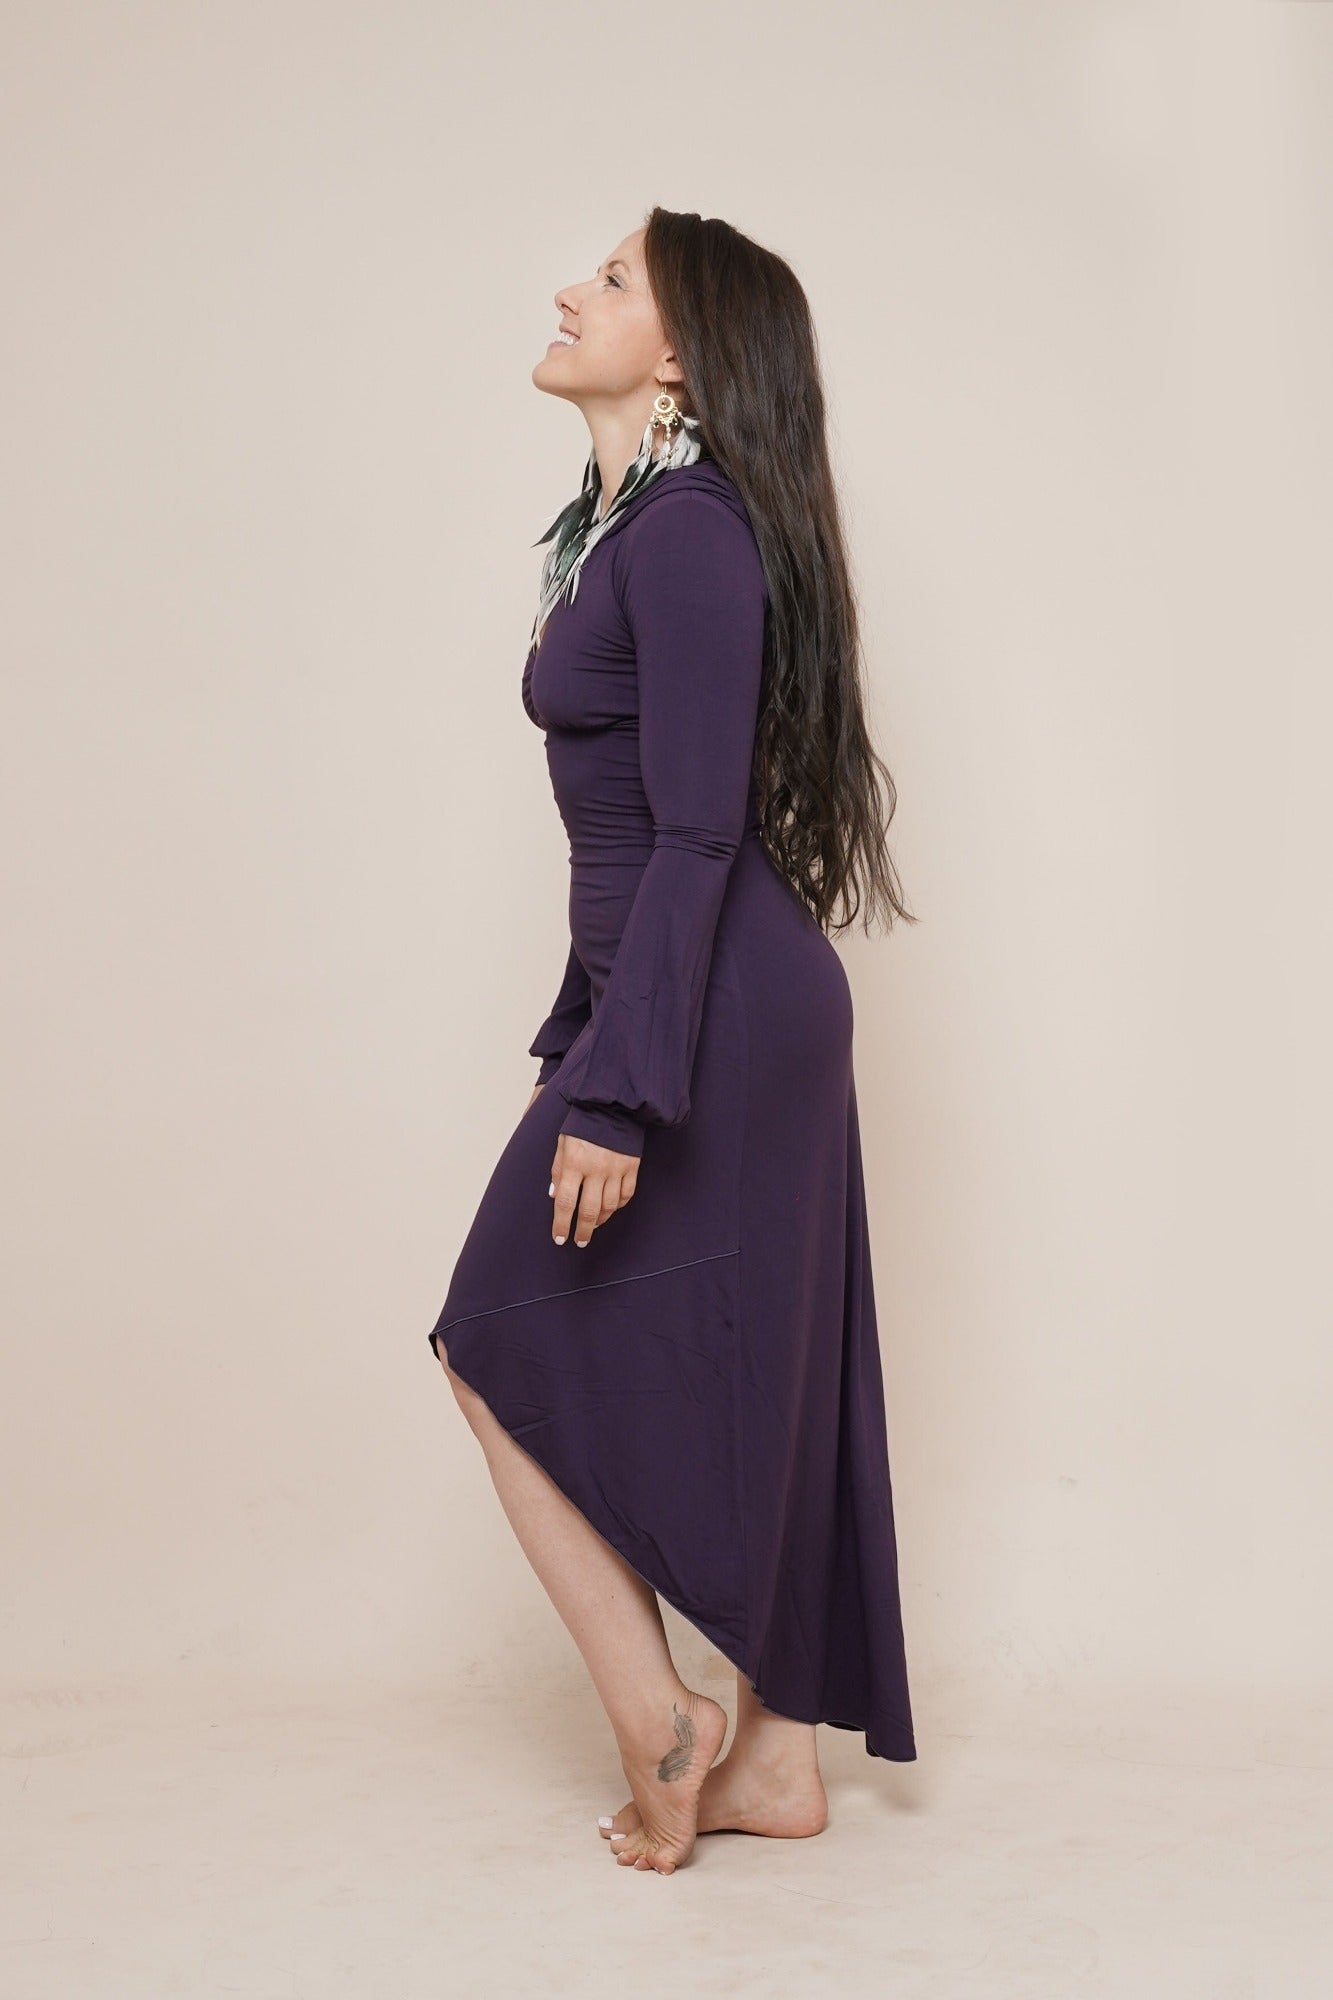 Long dress with long puffy sleeves and removable hood named Mystic in color plum by Bohemian Goddess.